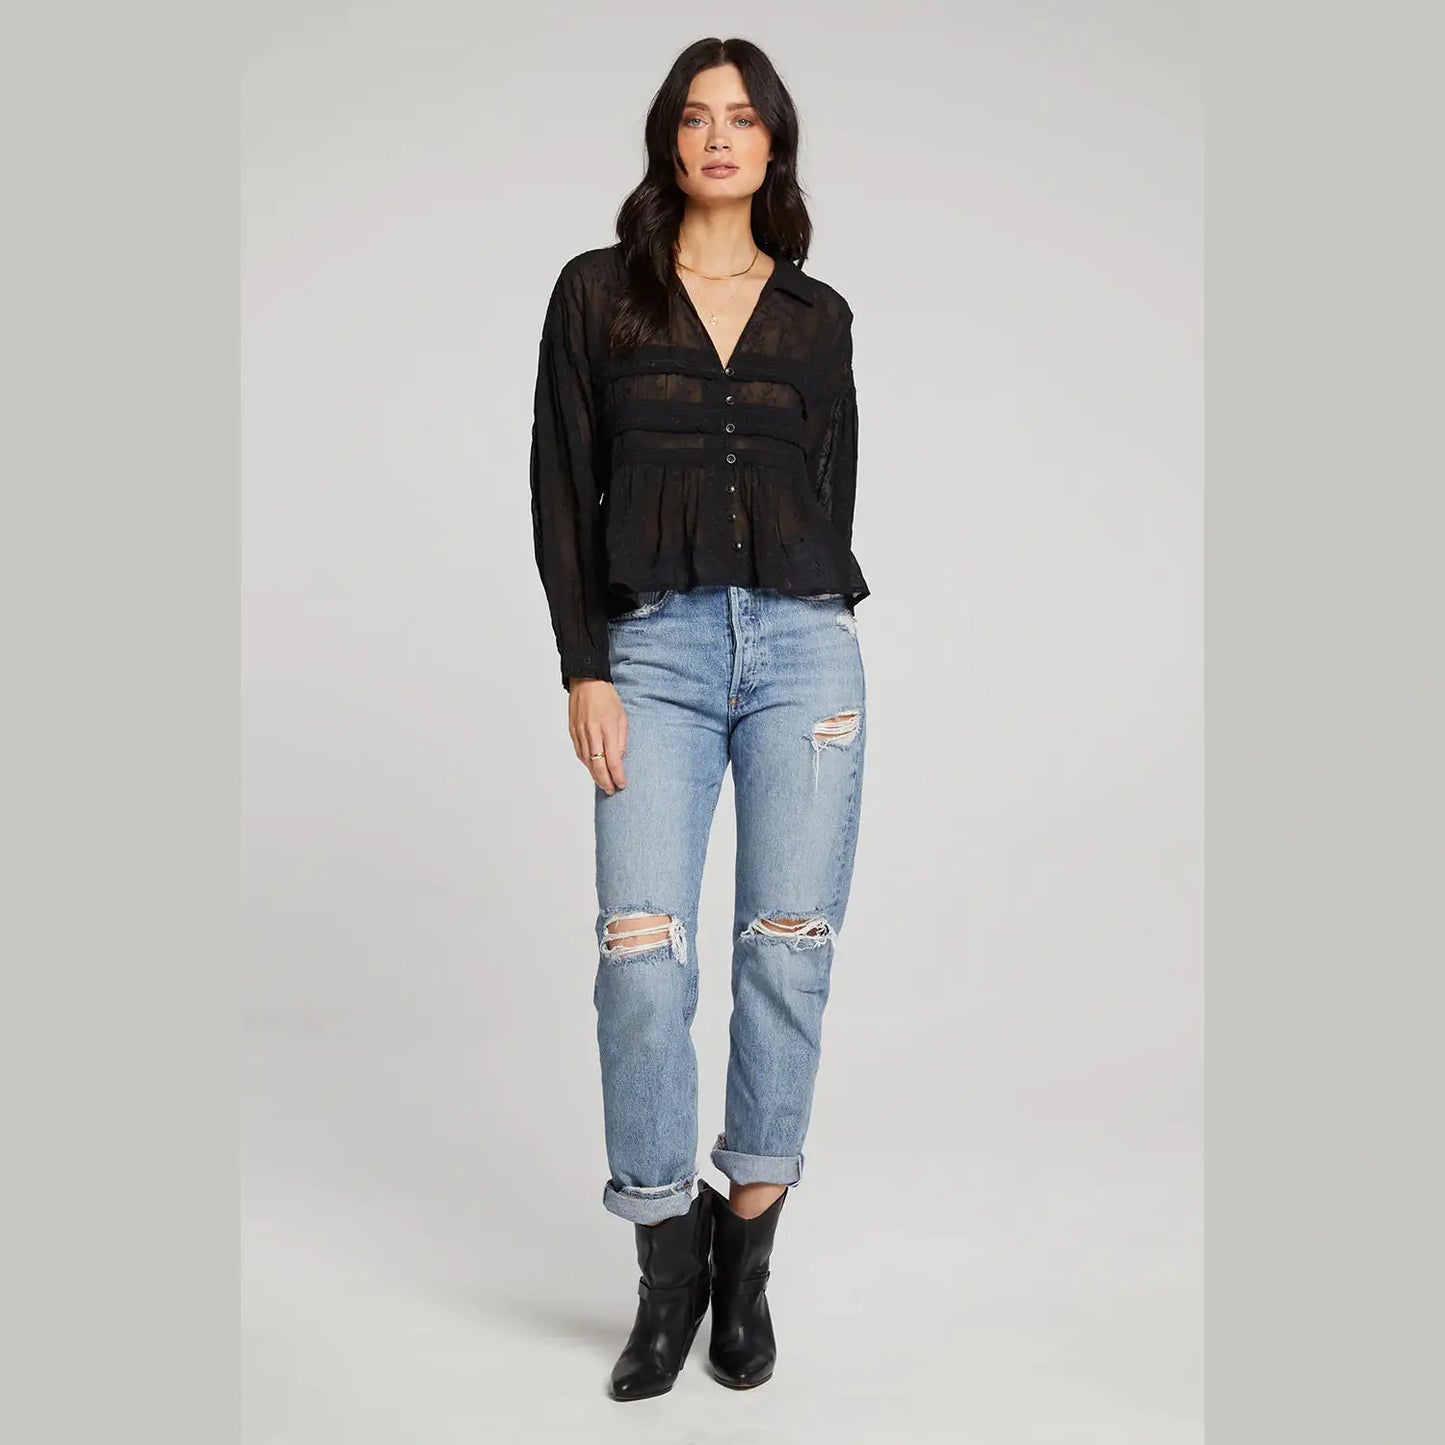 Saltwater Luxe Embroidered Prime Top in Black - Jaunts Boutique 